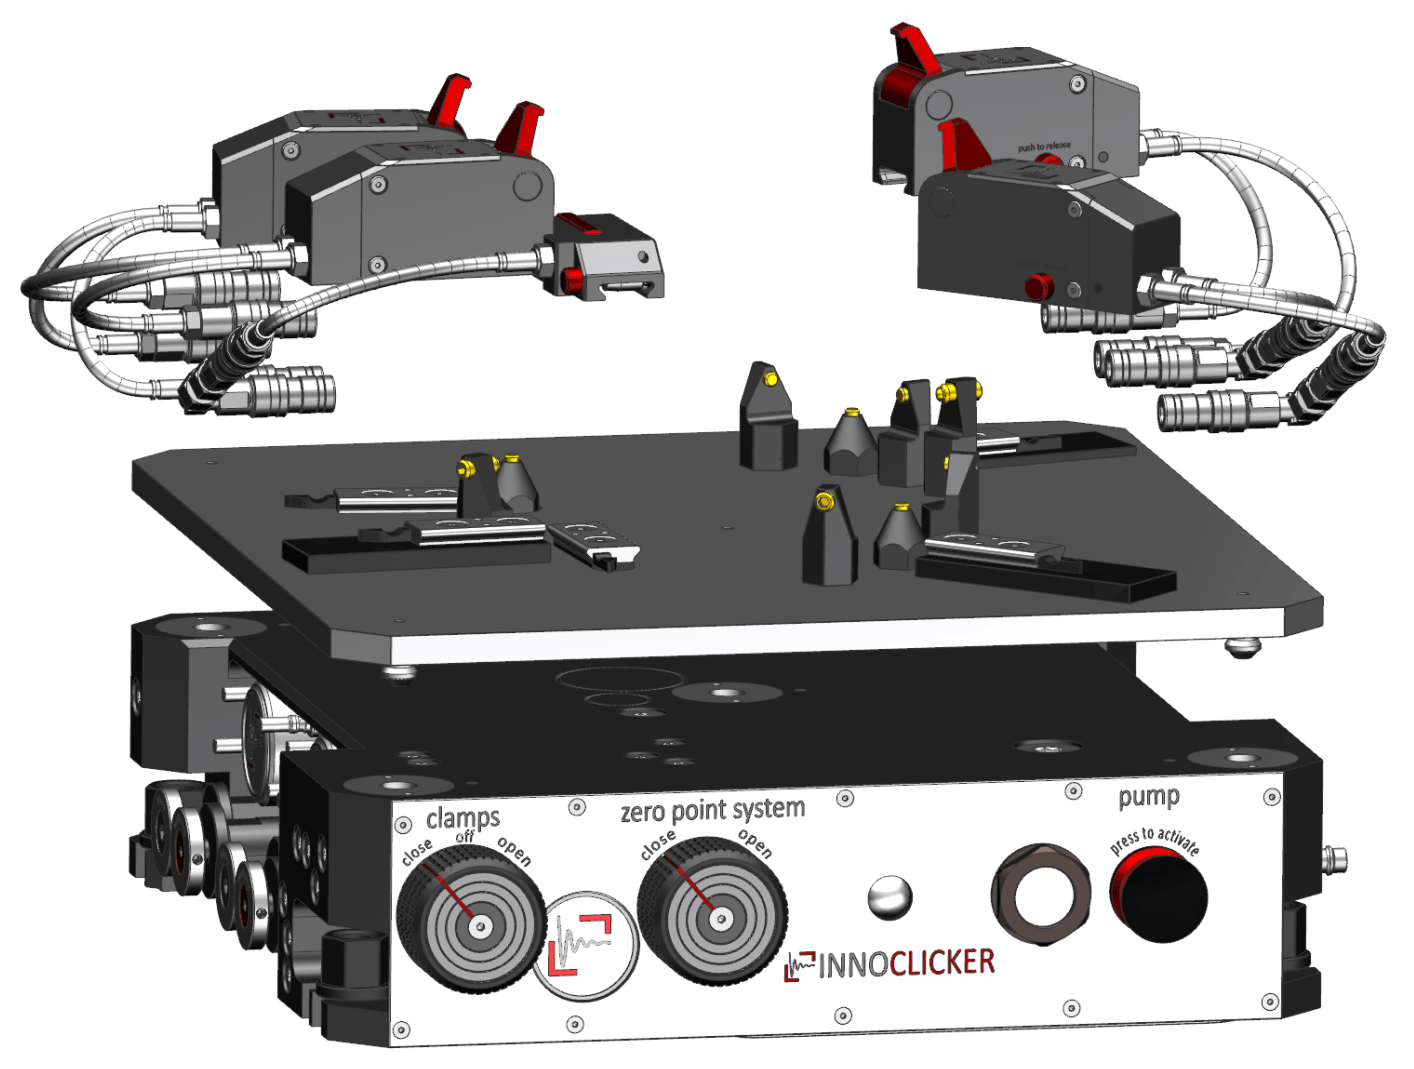 Innoclicker modular clamping system and components exploded view